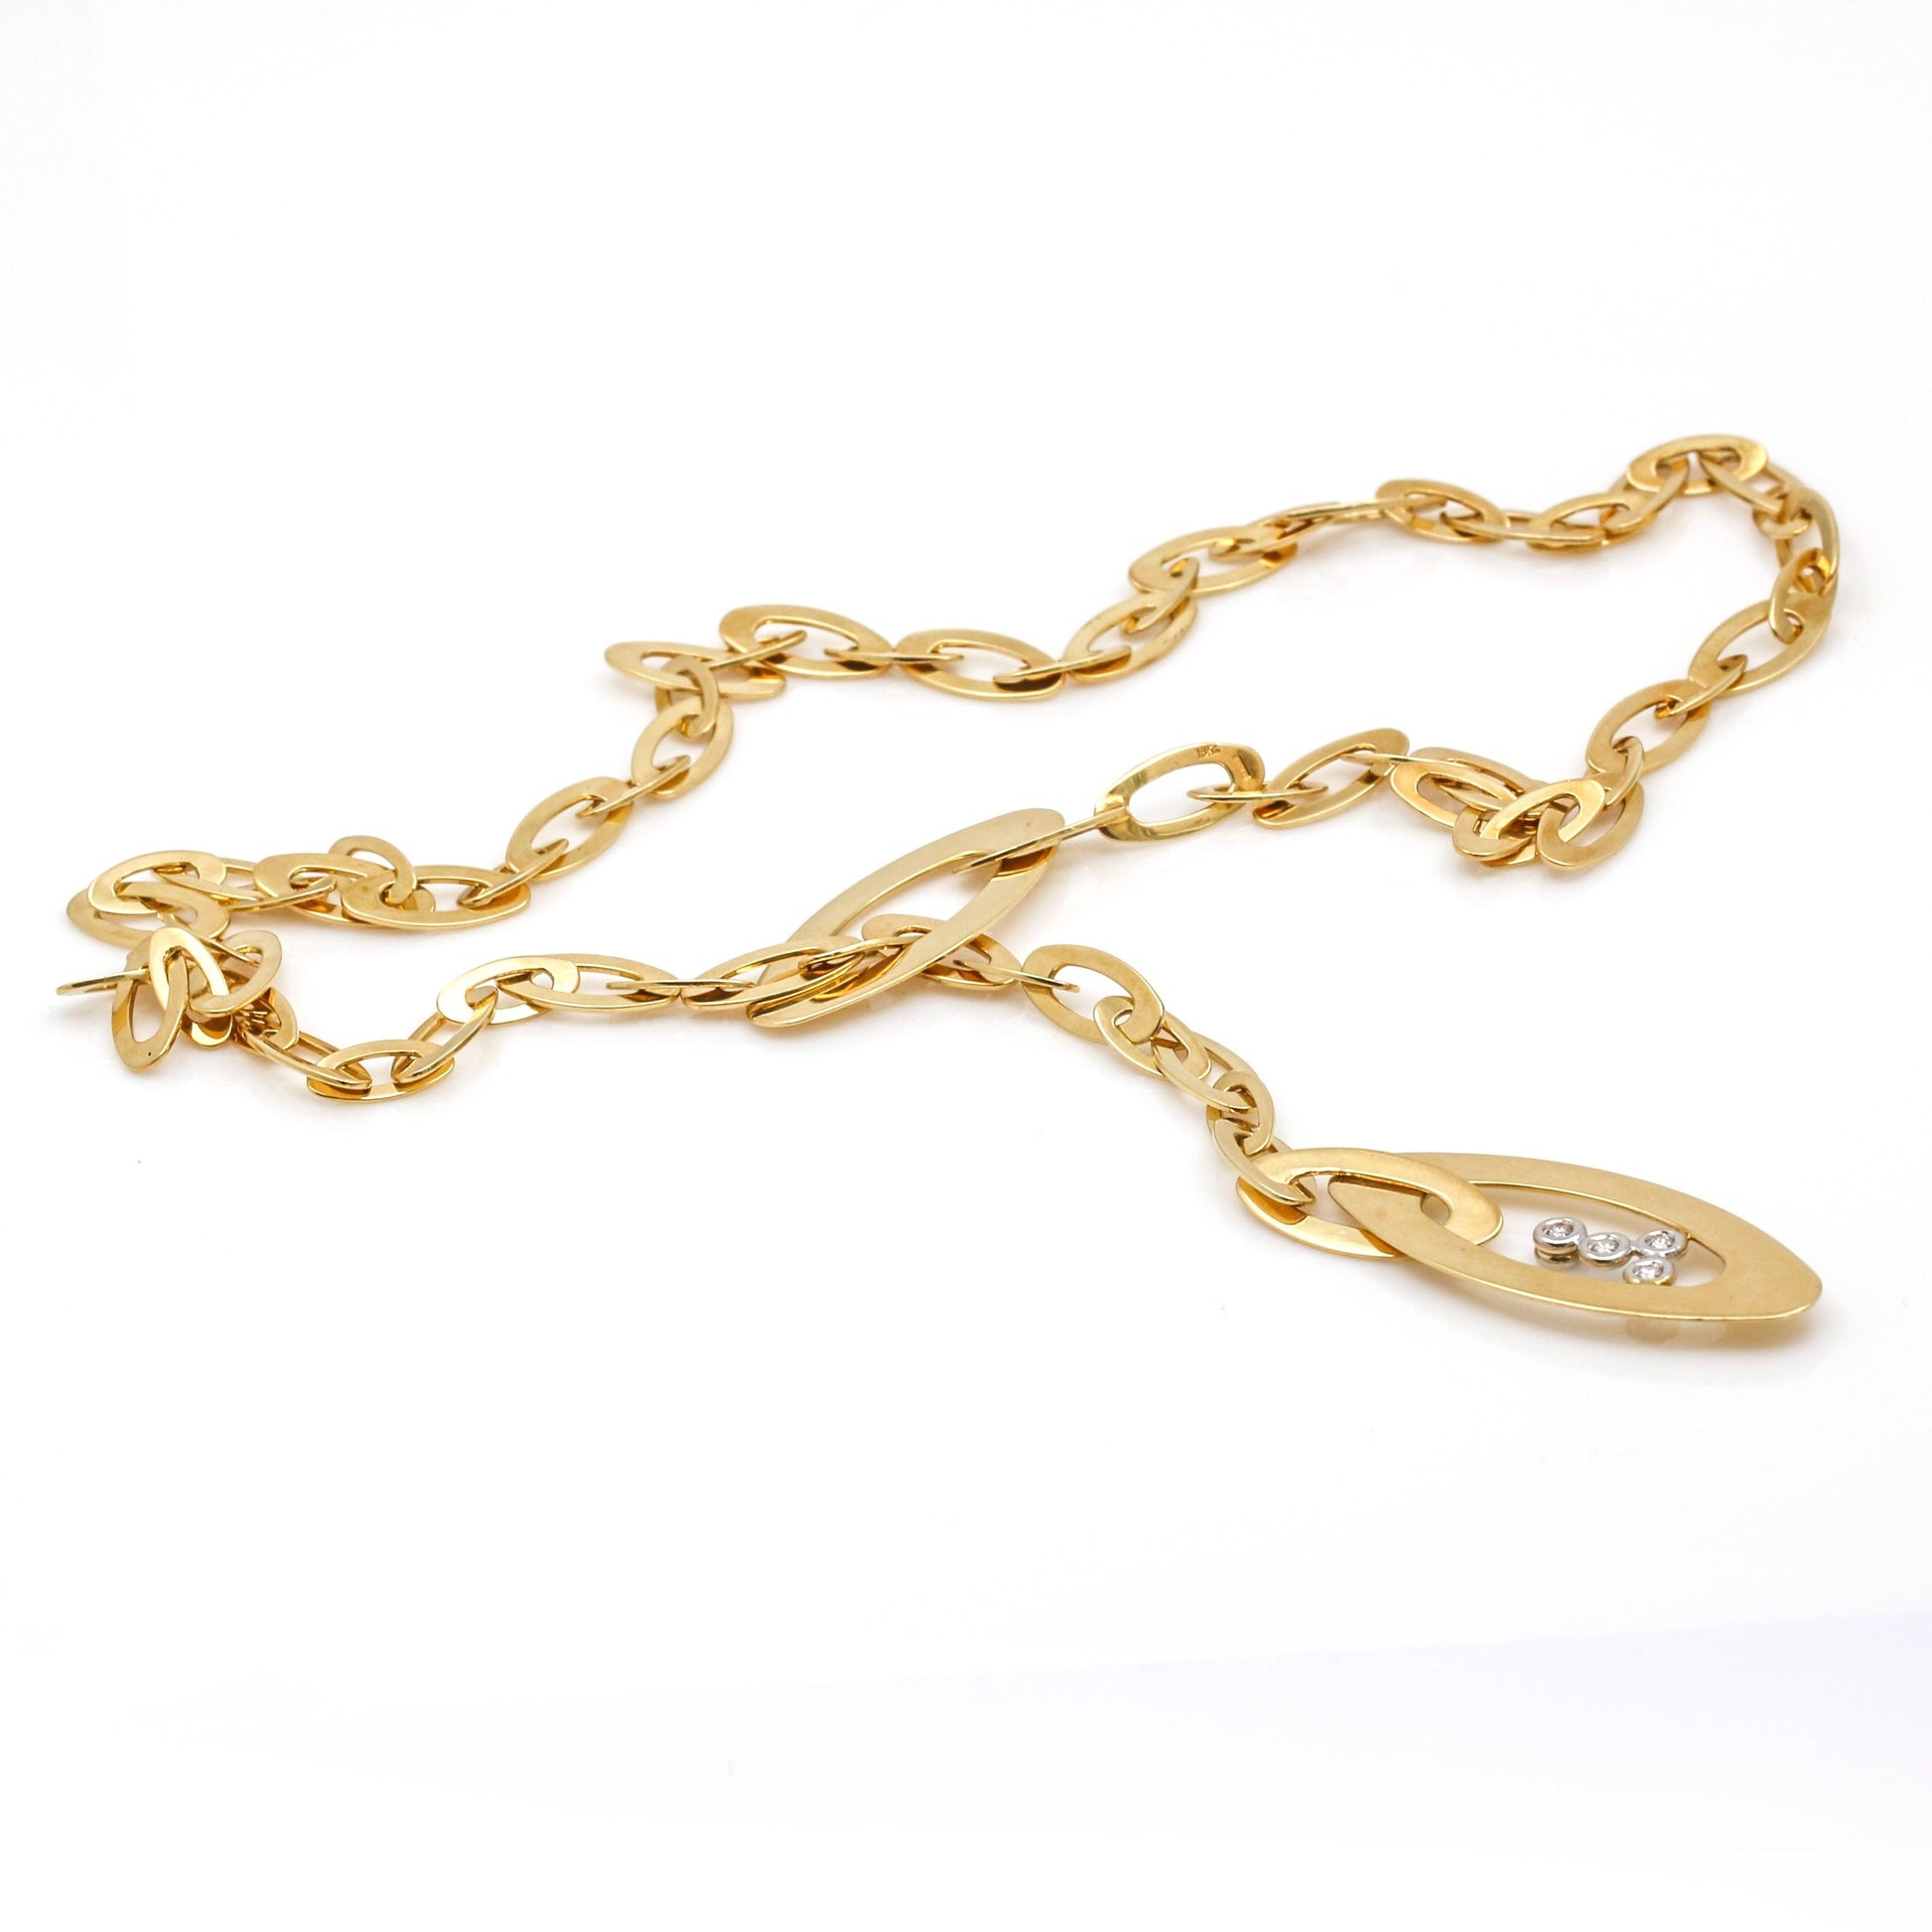 Roberto Coin Chic and Shine Diamond Lariat Necklace in 18k Yellow Gold - 31 Jewels Inc.